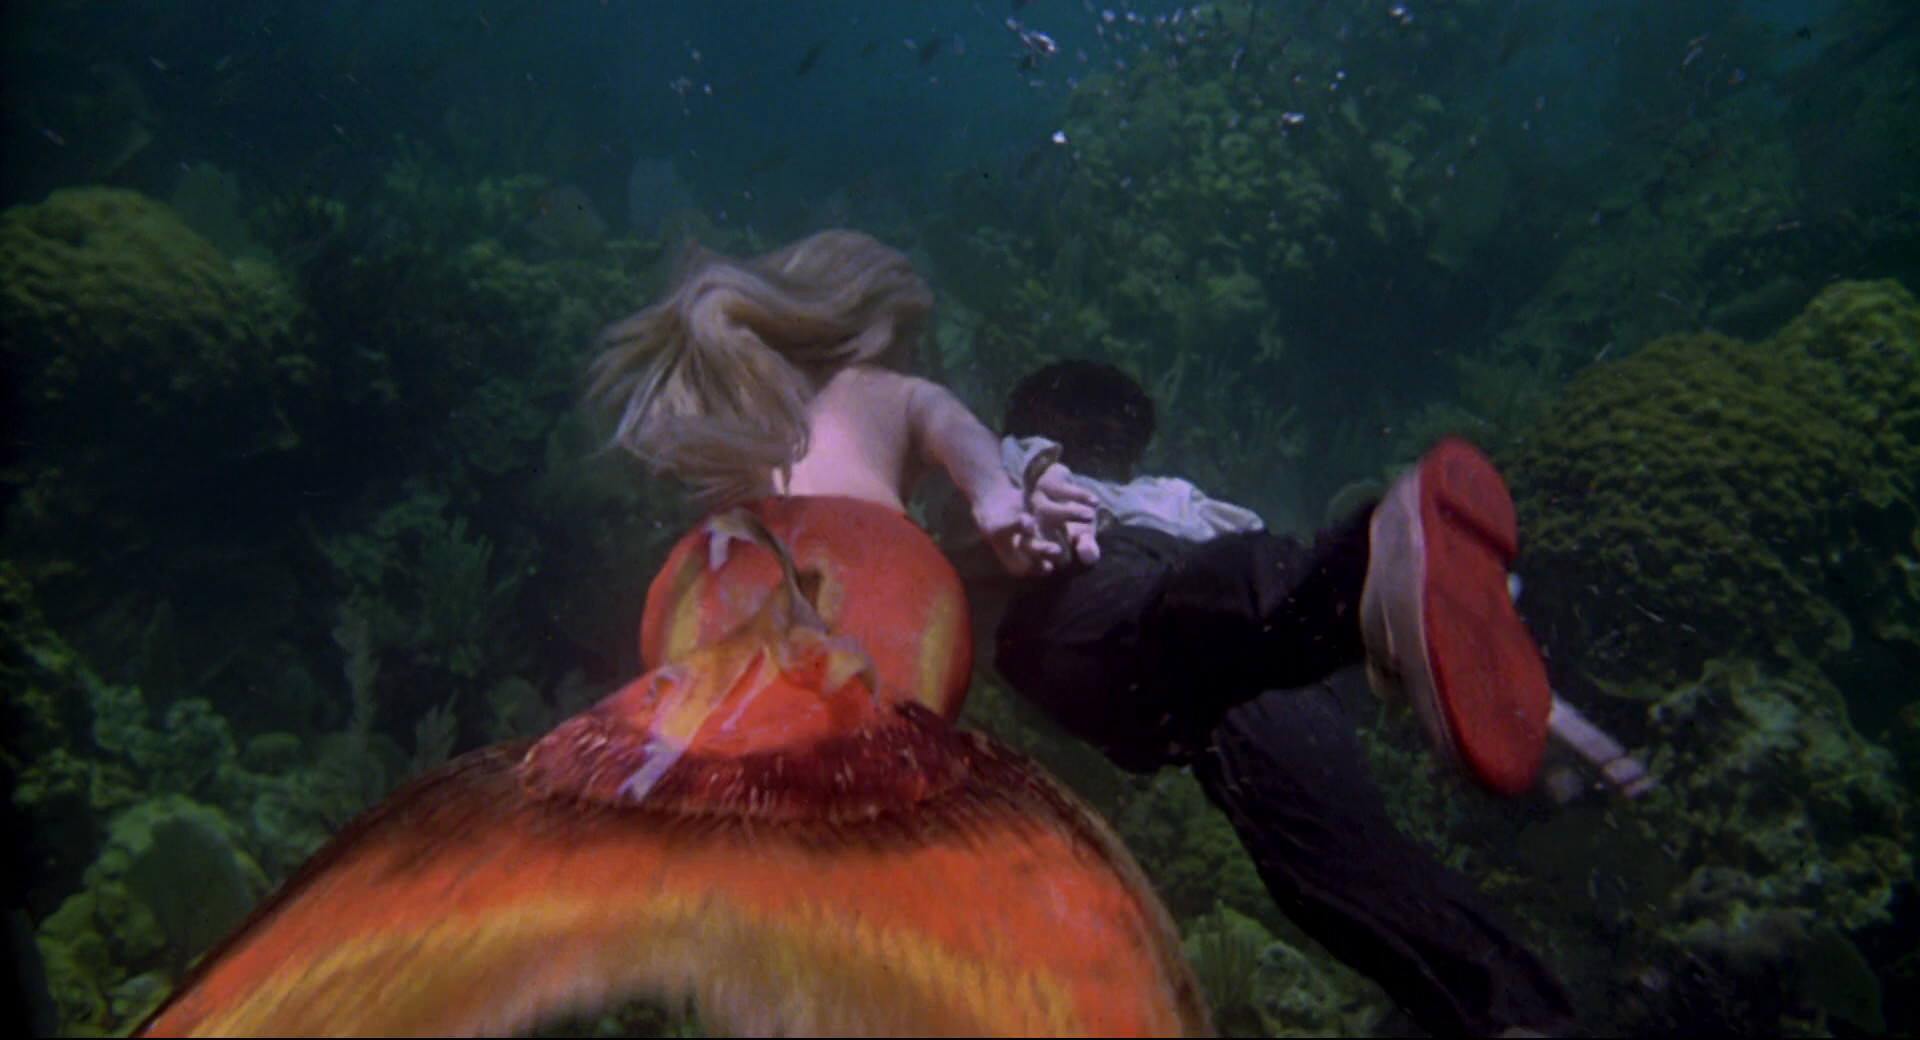 A man and woman swimming underwater next to an orange object.